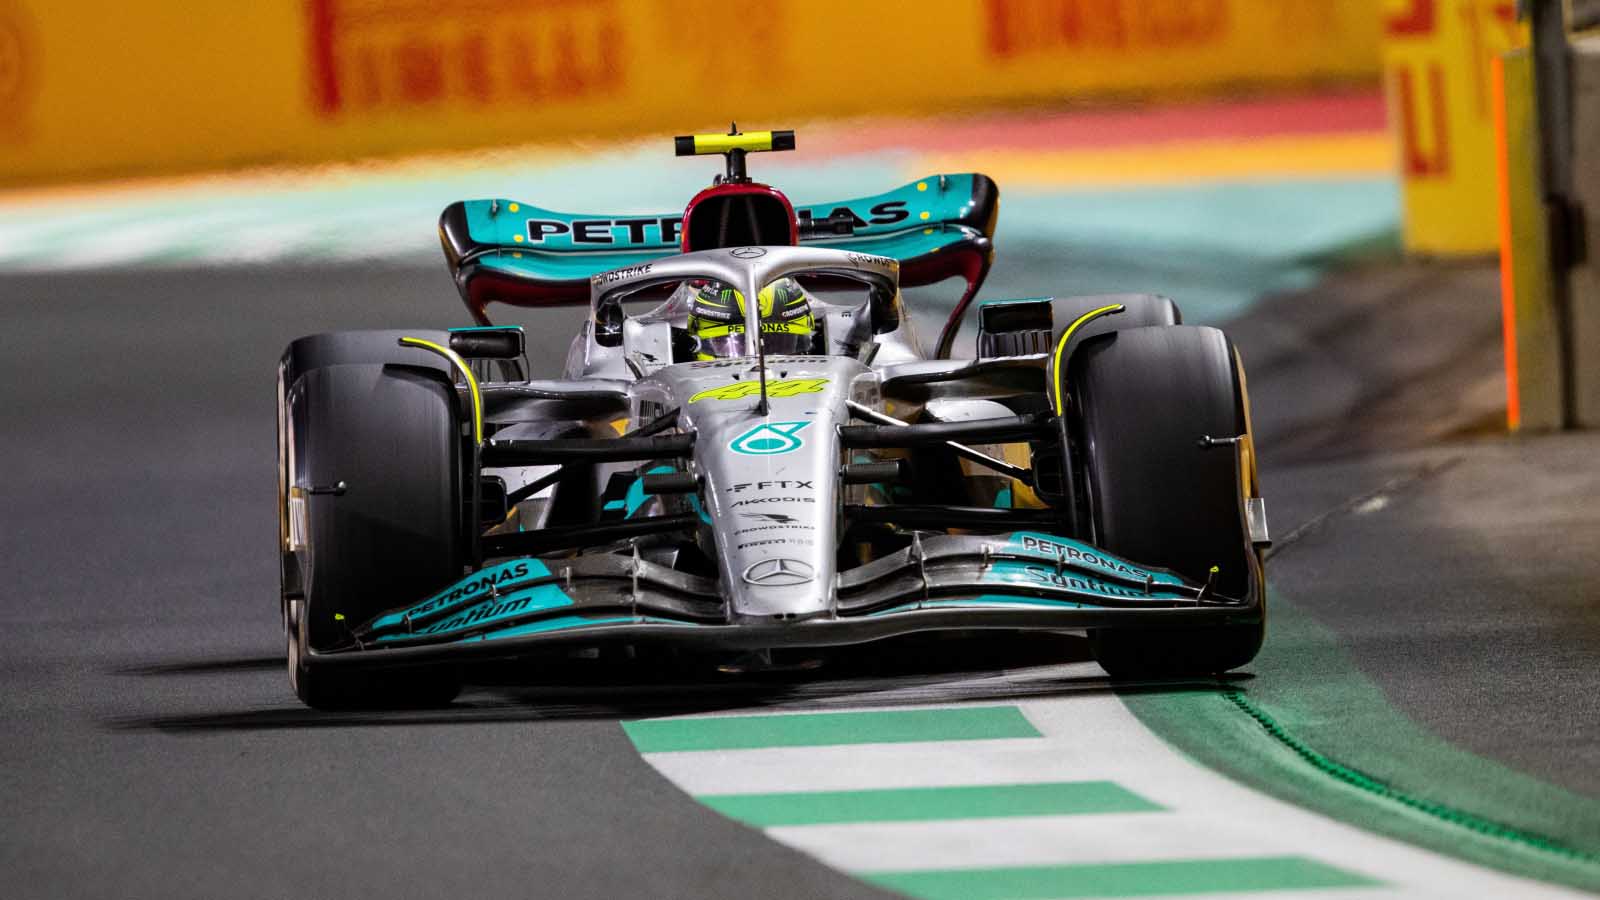 Mercedes driver Lewis Hamilton in action. Jeddah March 2022.